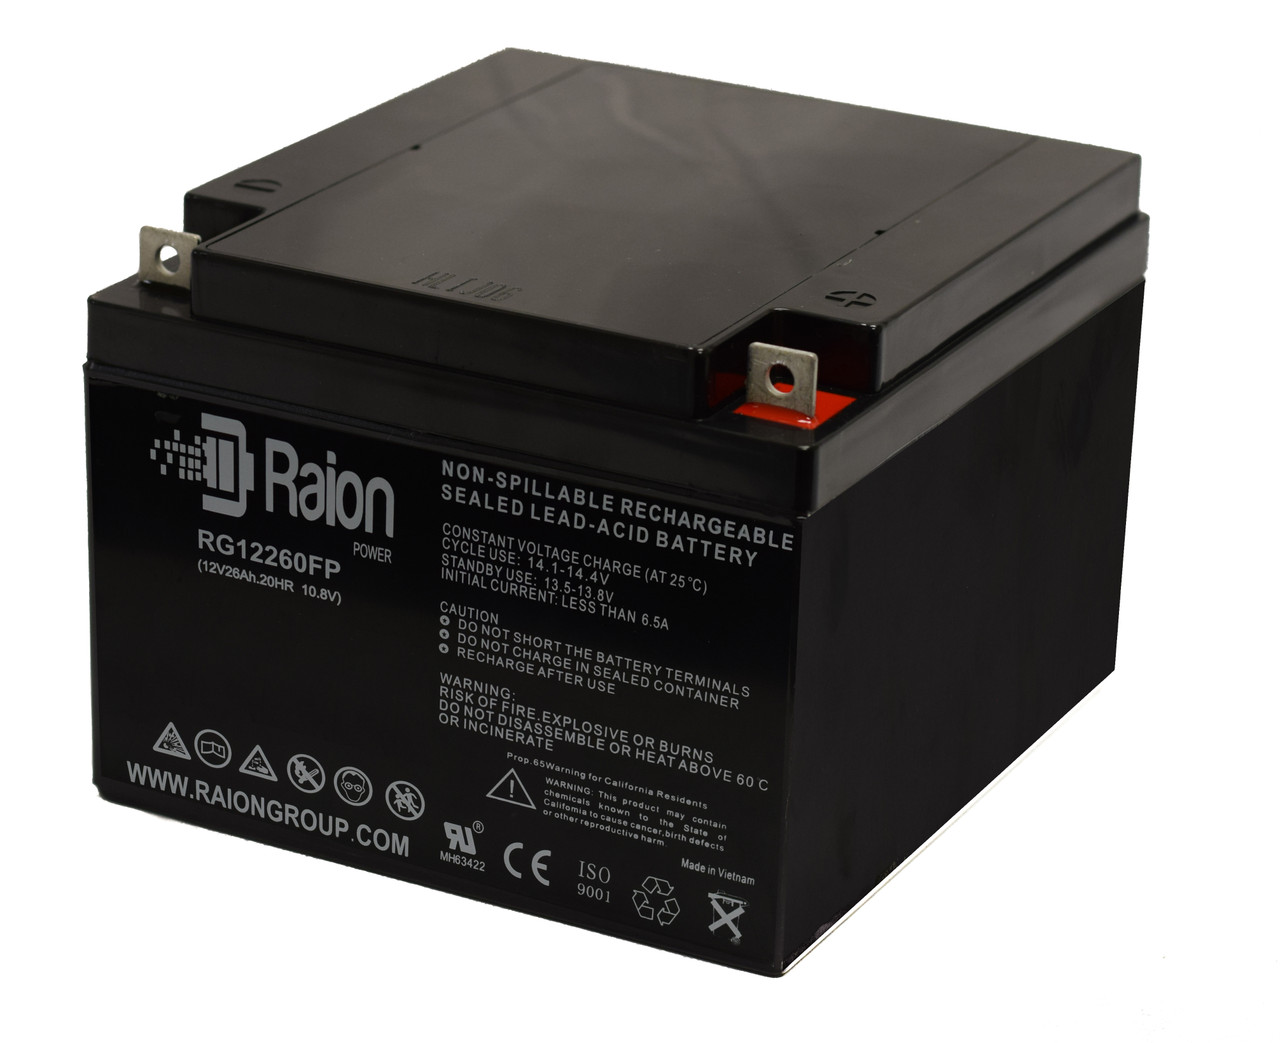 Raion Power Replacement 12V 26Ah Battery for VCELL 12VC26 - 1 Pack